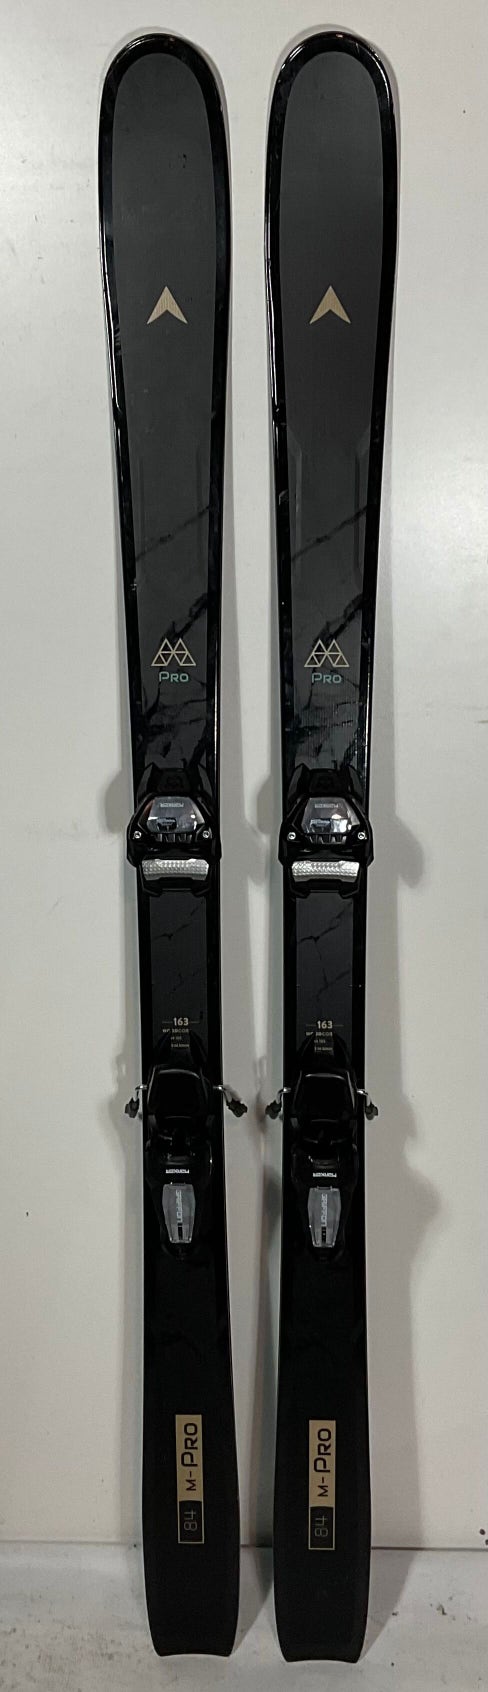 Used Dynastar 163cm M-Pro 84 Skis With Marker Griffon Bindings (419)